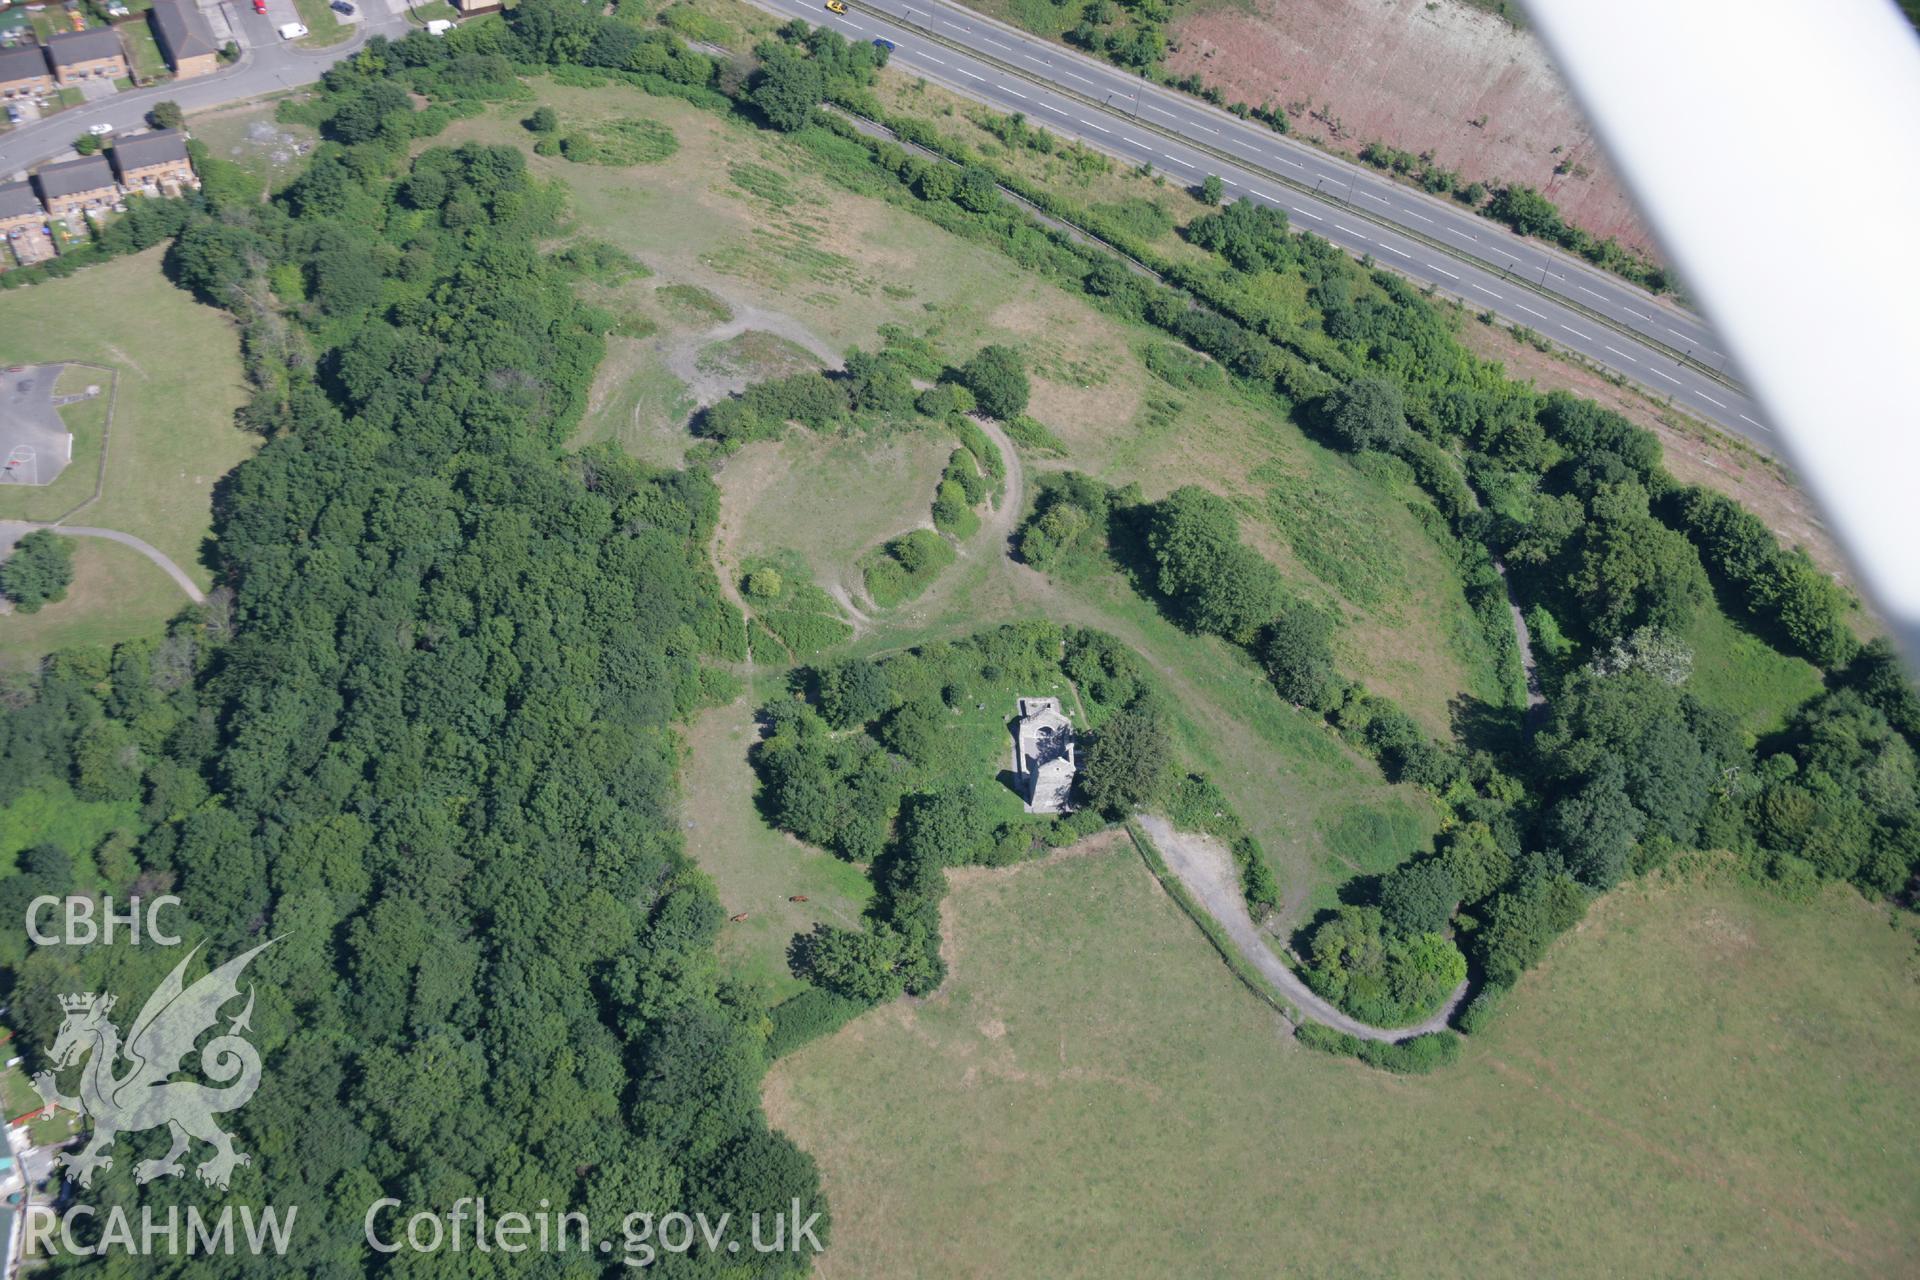 RCAHMW colour oblique aerial photograph of Caerau Hillfort. Taken on 24 July 2006 by Toby Driver.